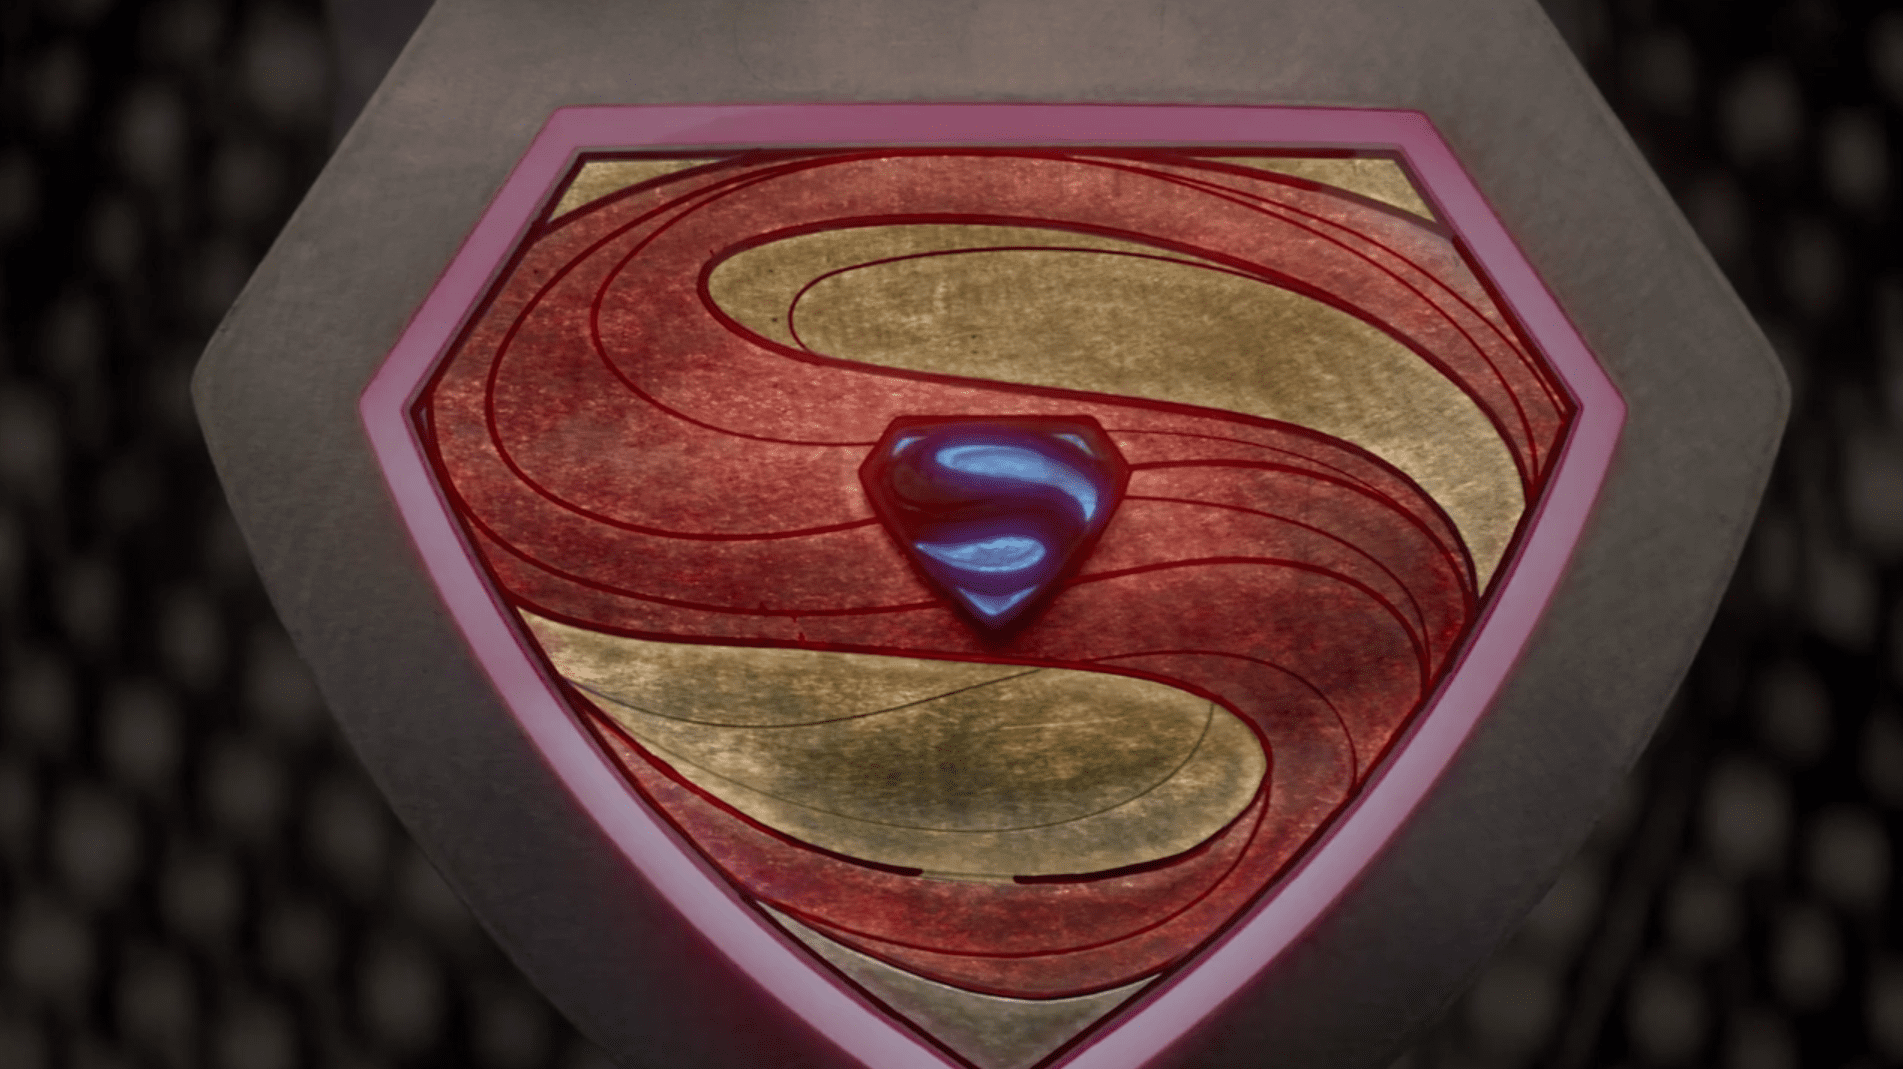 The teaser trailer for the upcoming ‘Krypton’ TV show on SyFy has leaked